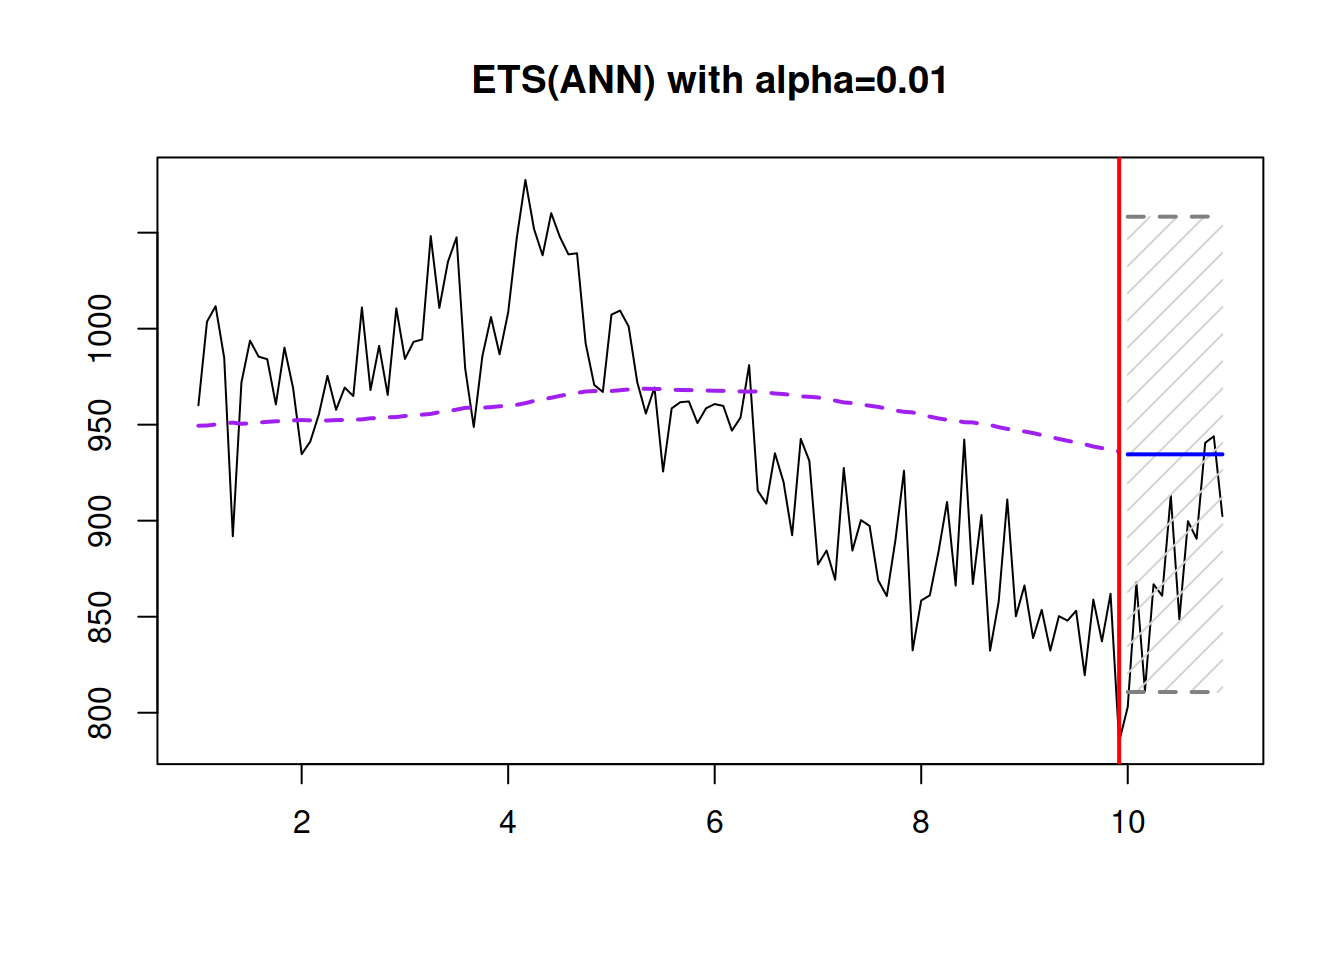 ETS(A,N,N) with $\hat{\alpha}=0.01$ applied to the data generated from the same model with $\alpha=0.3$.